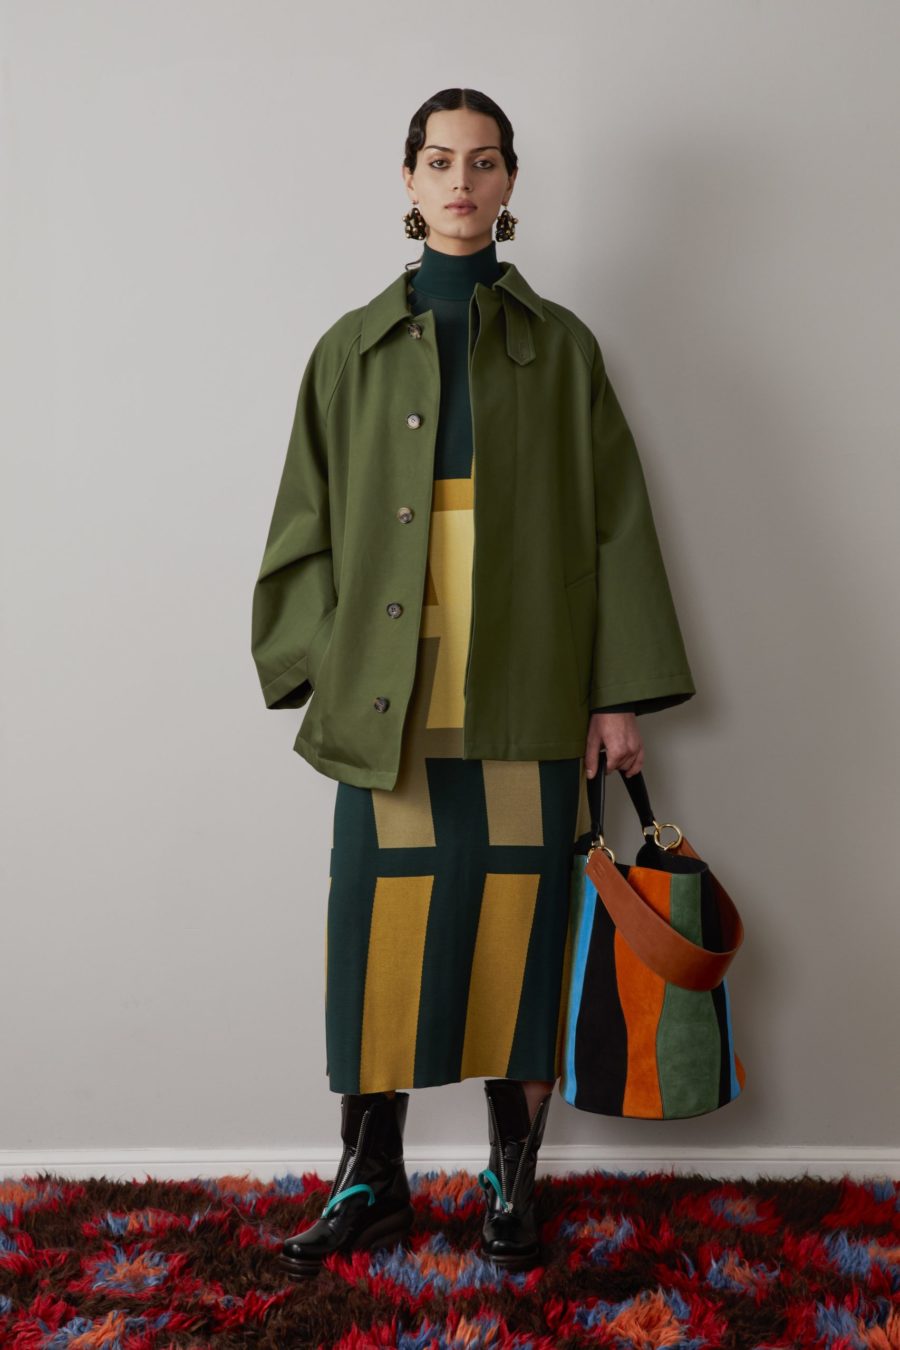 AW22 Colville. Green Jacket. with Multi-color bag. The fashion stalwarts, Lucinda Chambers and Molly Molloy of Colville, on crafting thoughtful, eclectic pieces designed to make an impact.